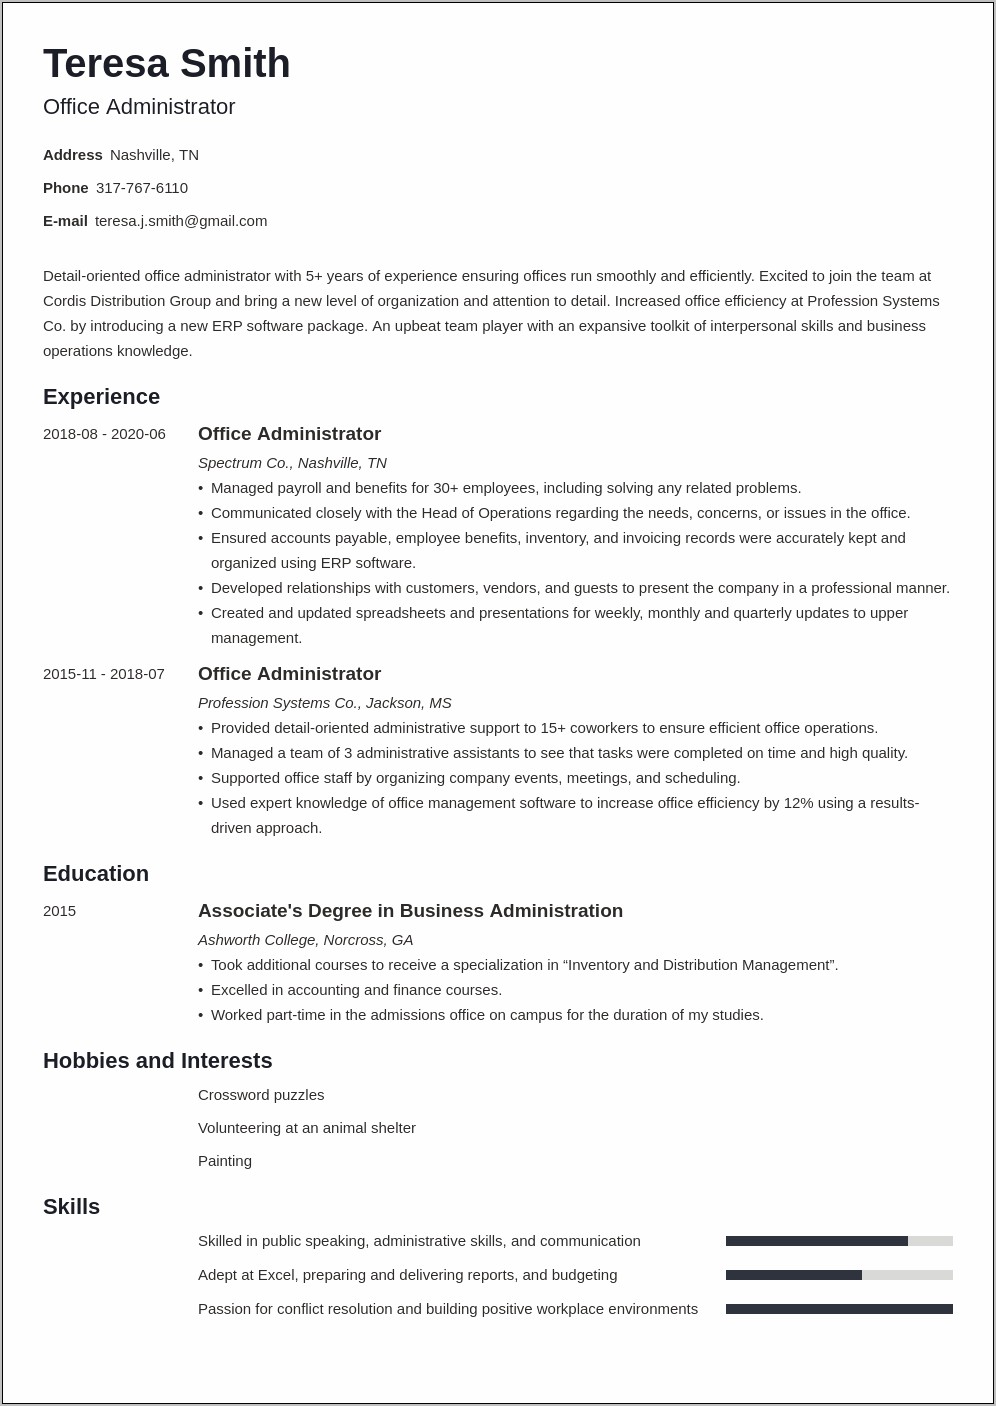 Job Description Of An Office Manager For Resume